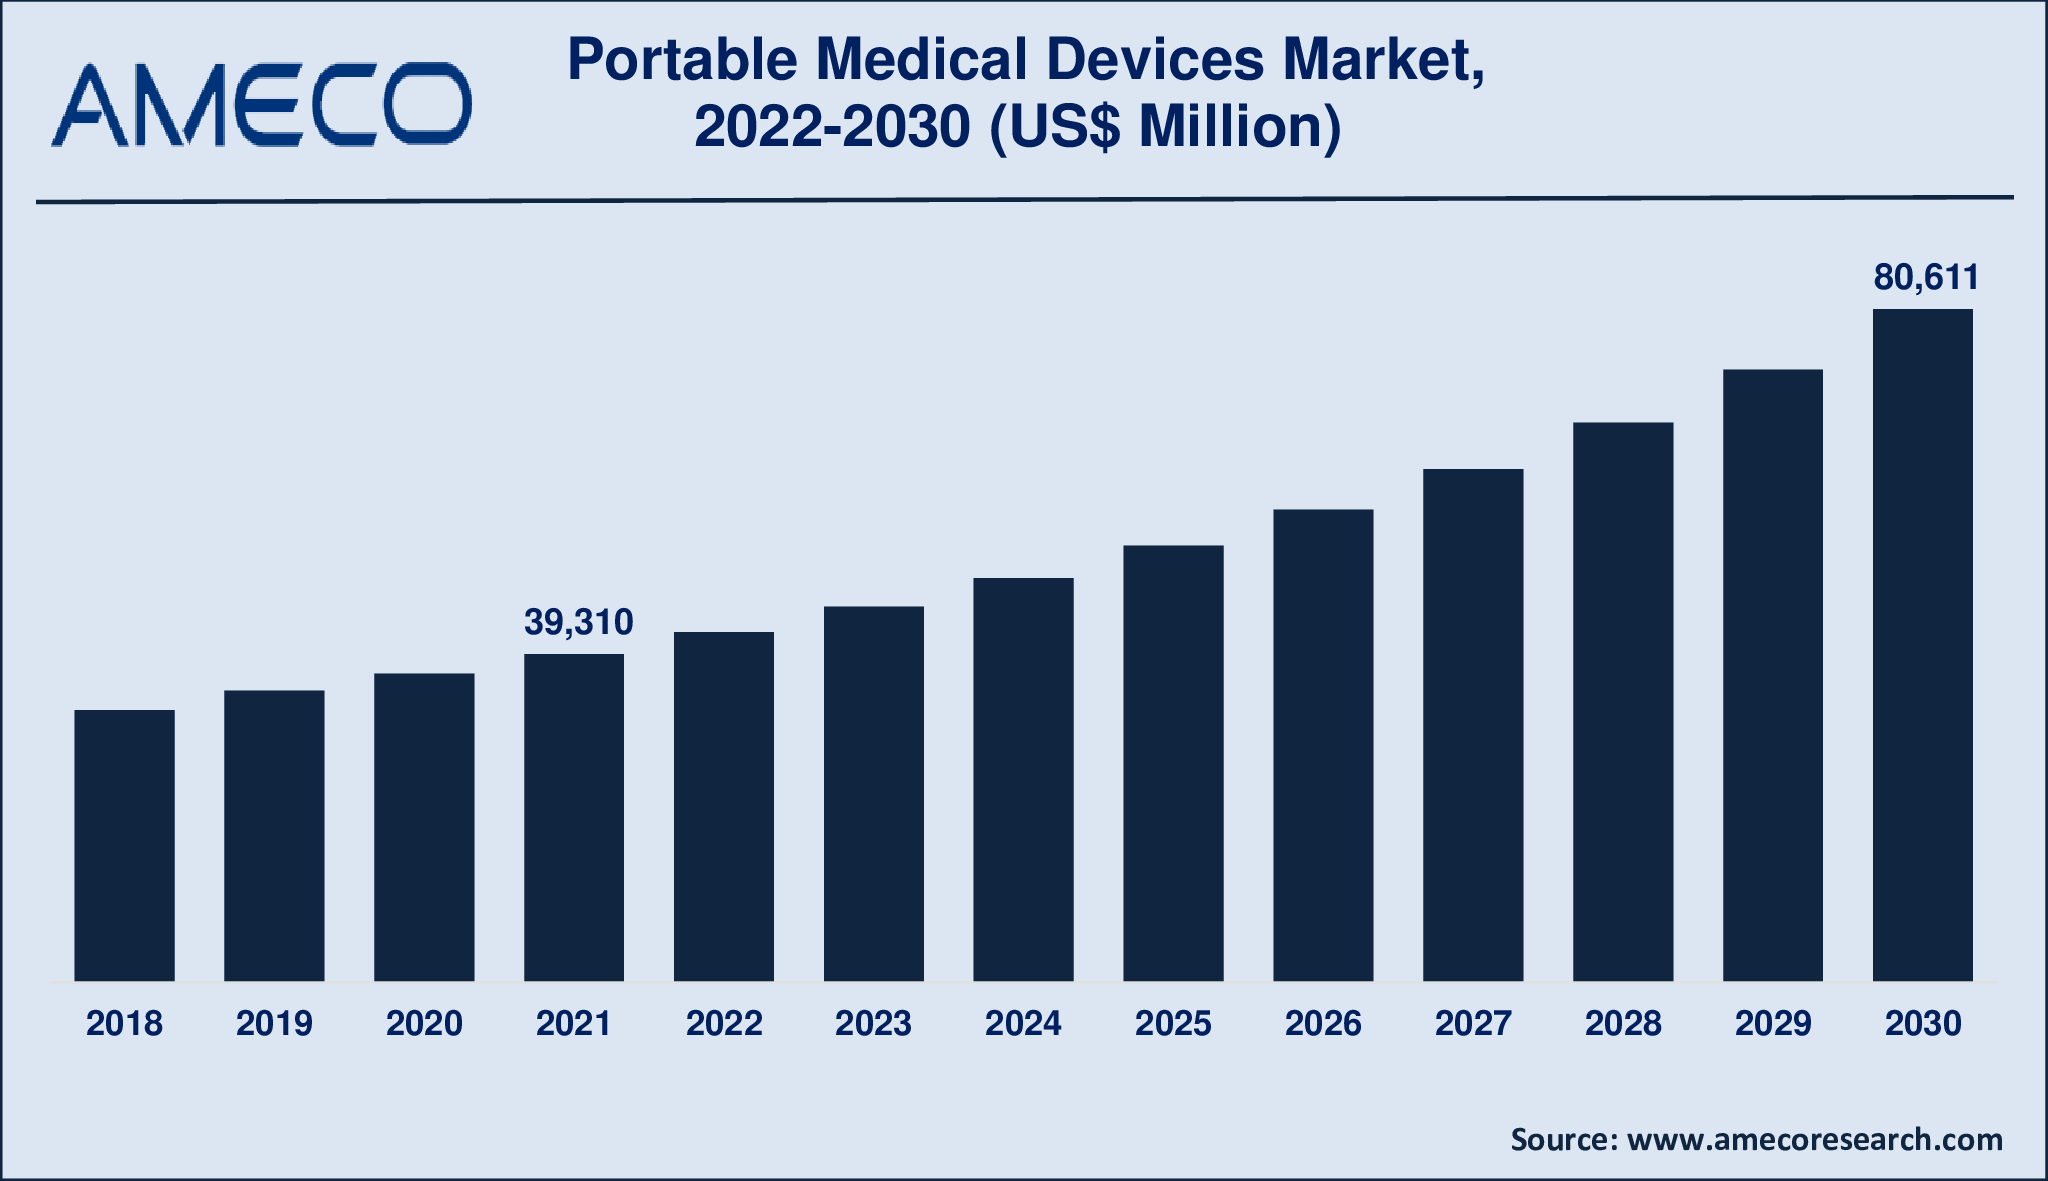 Portable Medical Devices Market Size, Share, Growth, Trends, and Forecast 2022-2030